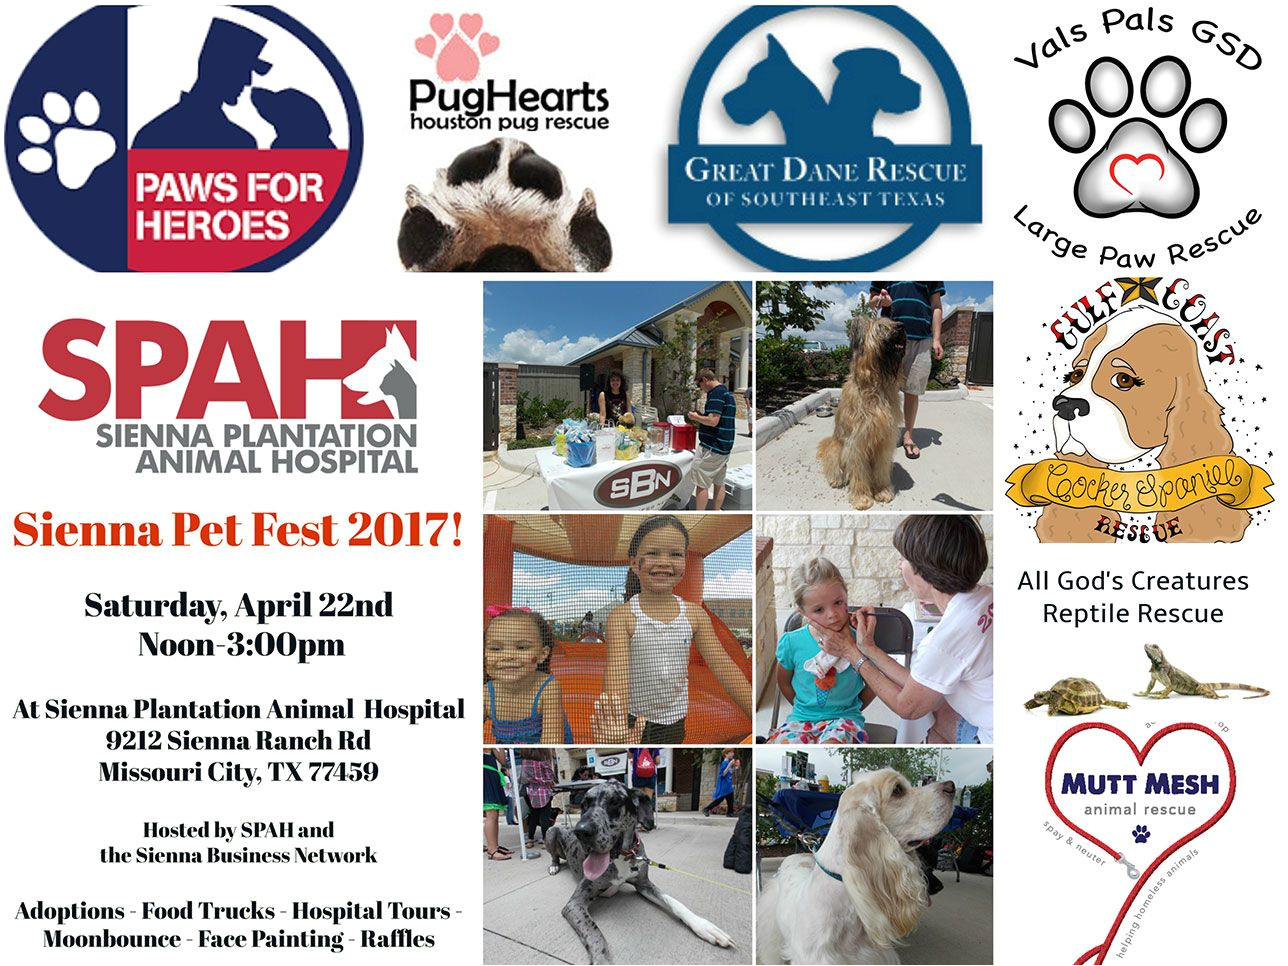 the sienna pet fest is an annual adoption event in sienna plantation hosted by spah and the sienna business network participating rescue organizations